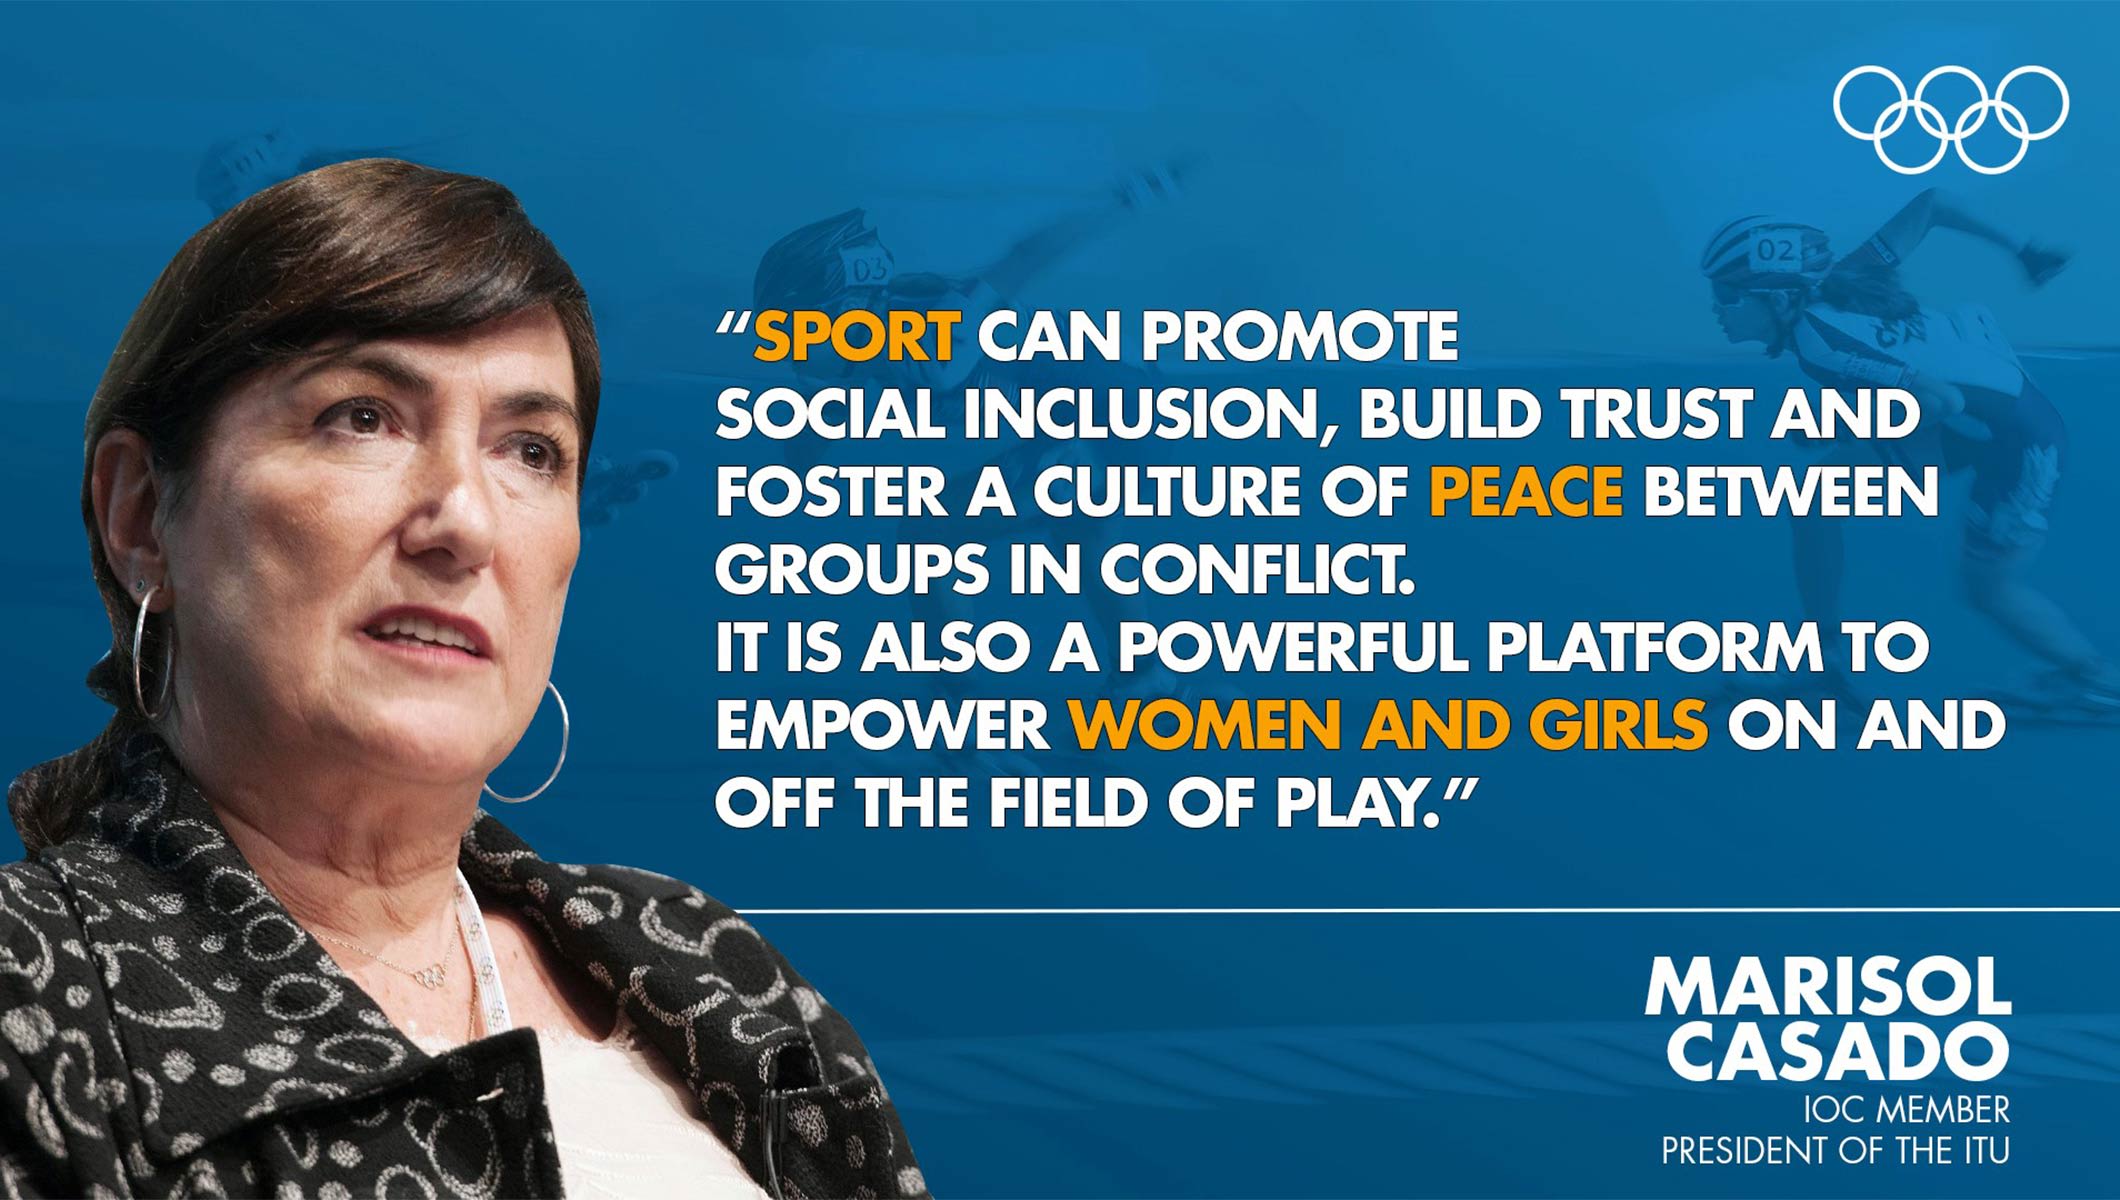 Women Political Leaders Summit discusses how sport contributes to the UN Sustainable Development Goals